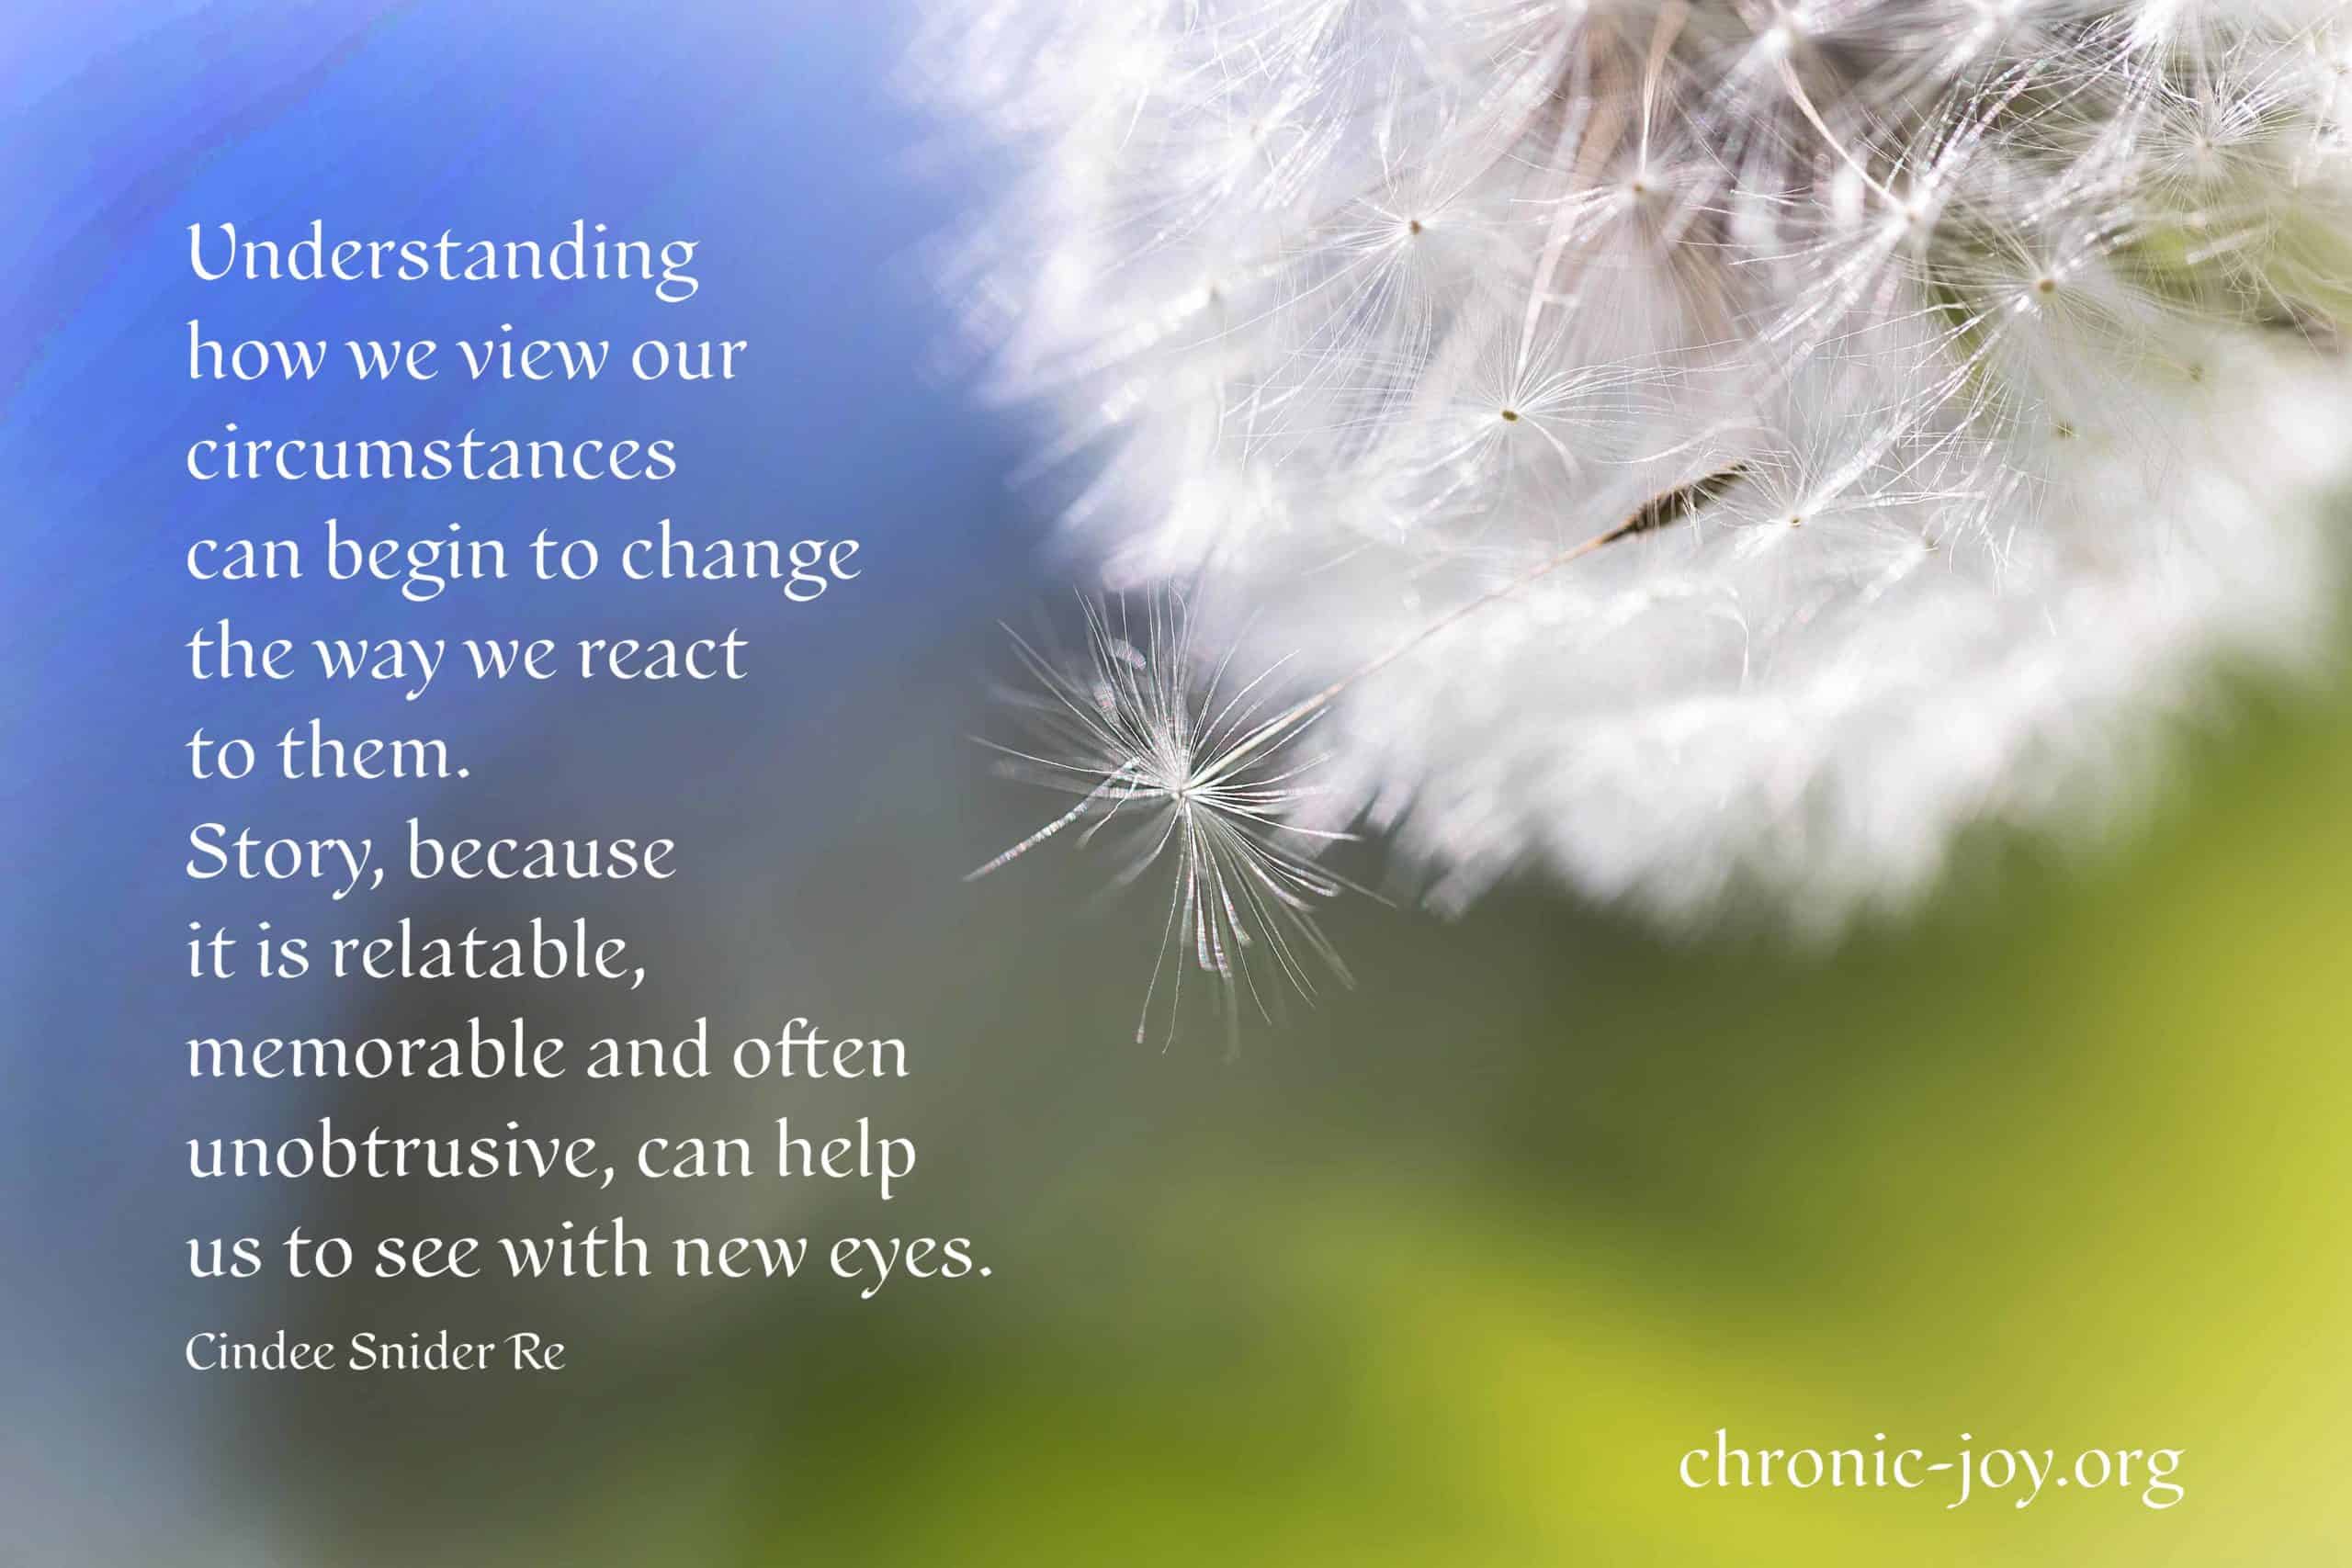 "Understanding how we view our circumstances can begin to change the way we react to them. Story, because it is relatable, memorable and often unobtrusive, can help us to see with new eyes." Cindee Snider Re